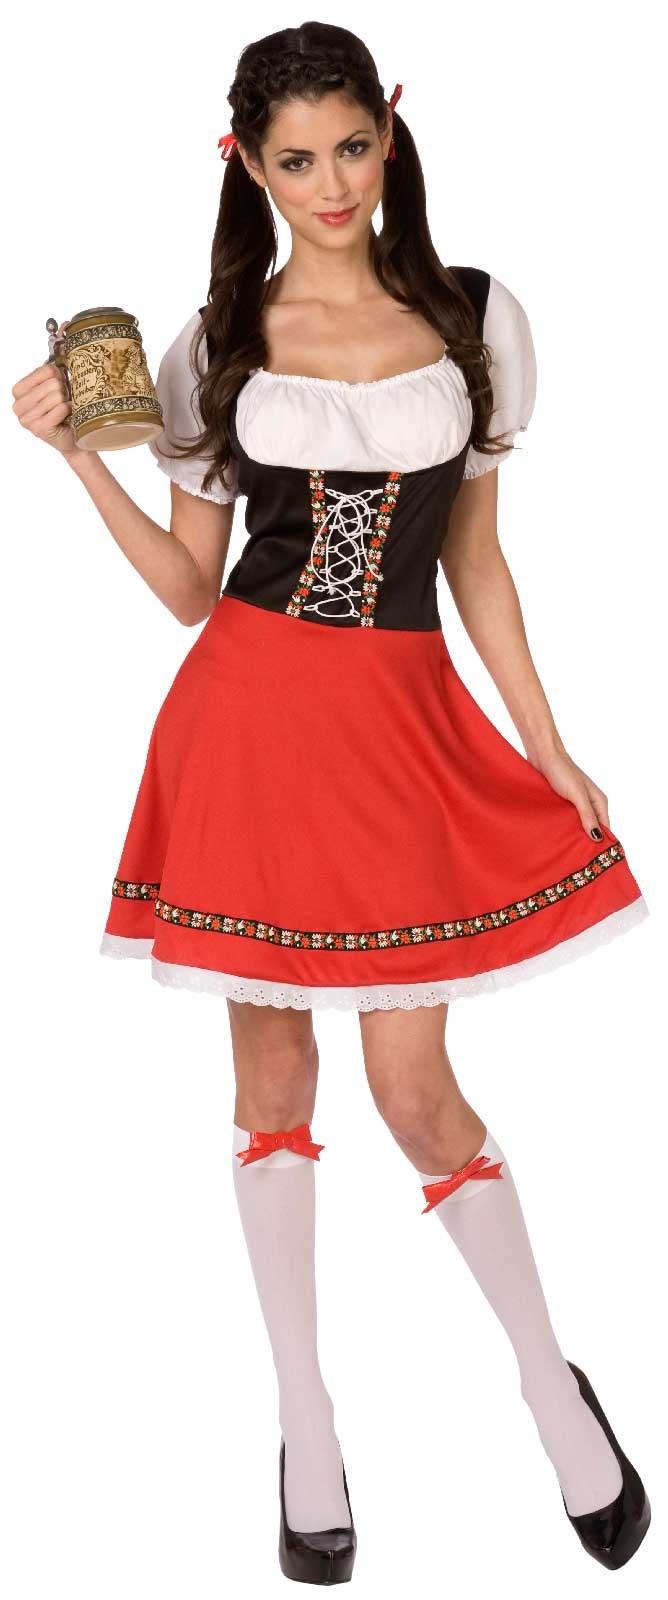 COMPLIMENTS OF THE SEASON German-girl-dress-adult-costume-bc-806515